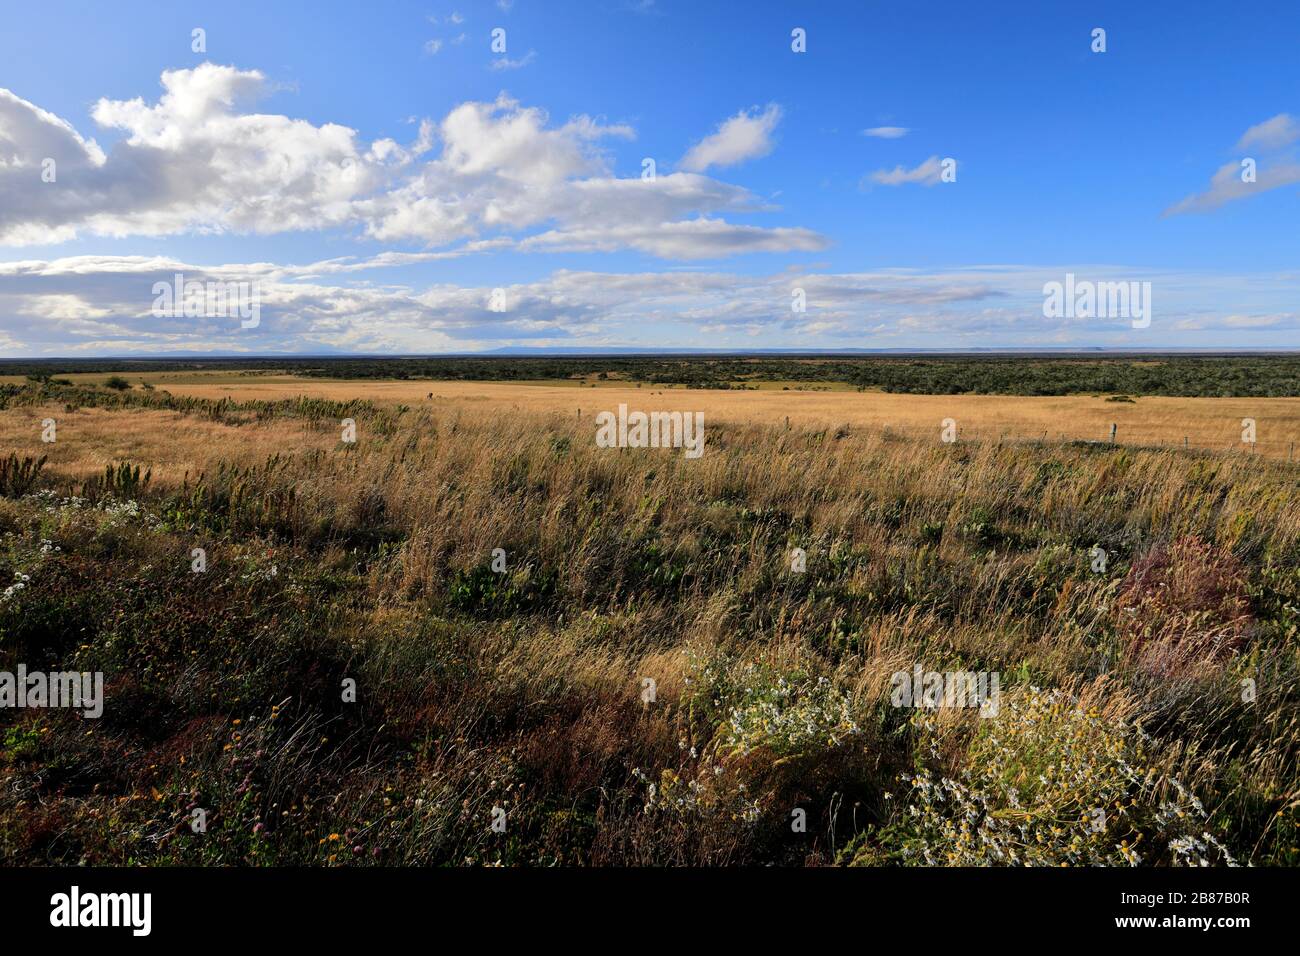 Dramatic clouds over the Patagonia Steppe desert, near Punta Arenas city, Patagonia, Chile, South America Stock Photo